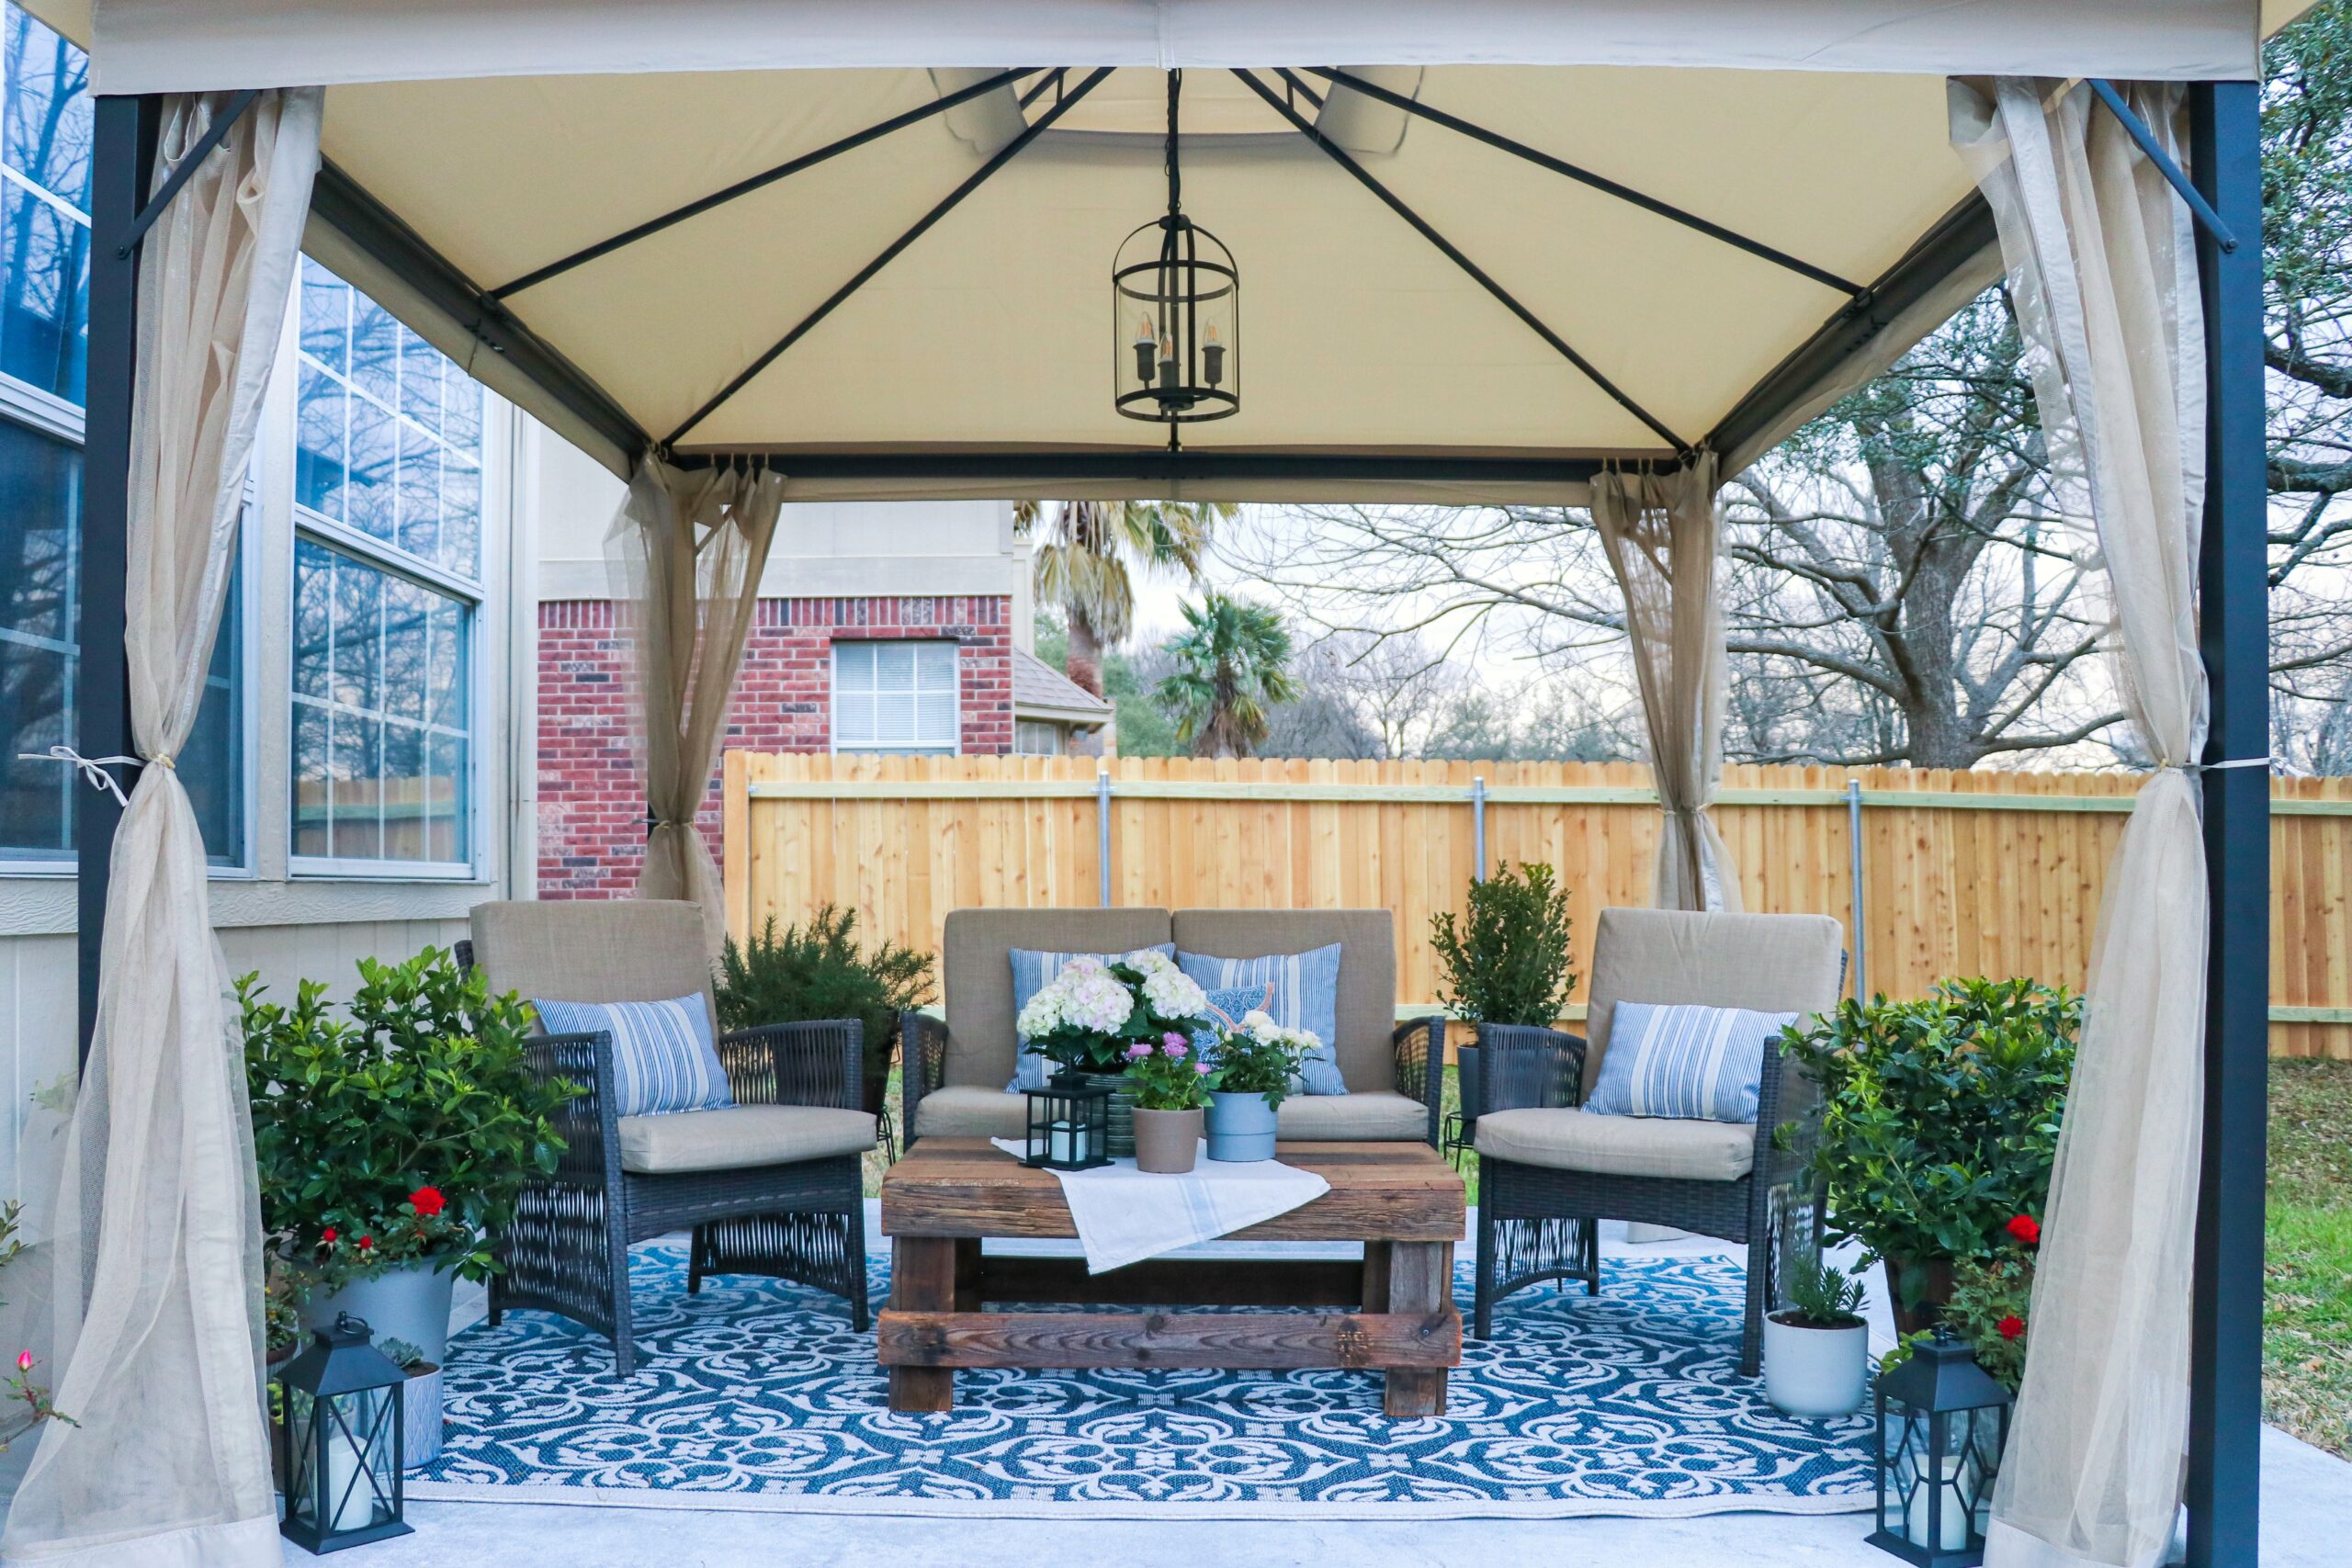 French country-inspired budget patio makeover - Fab Everyday